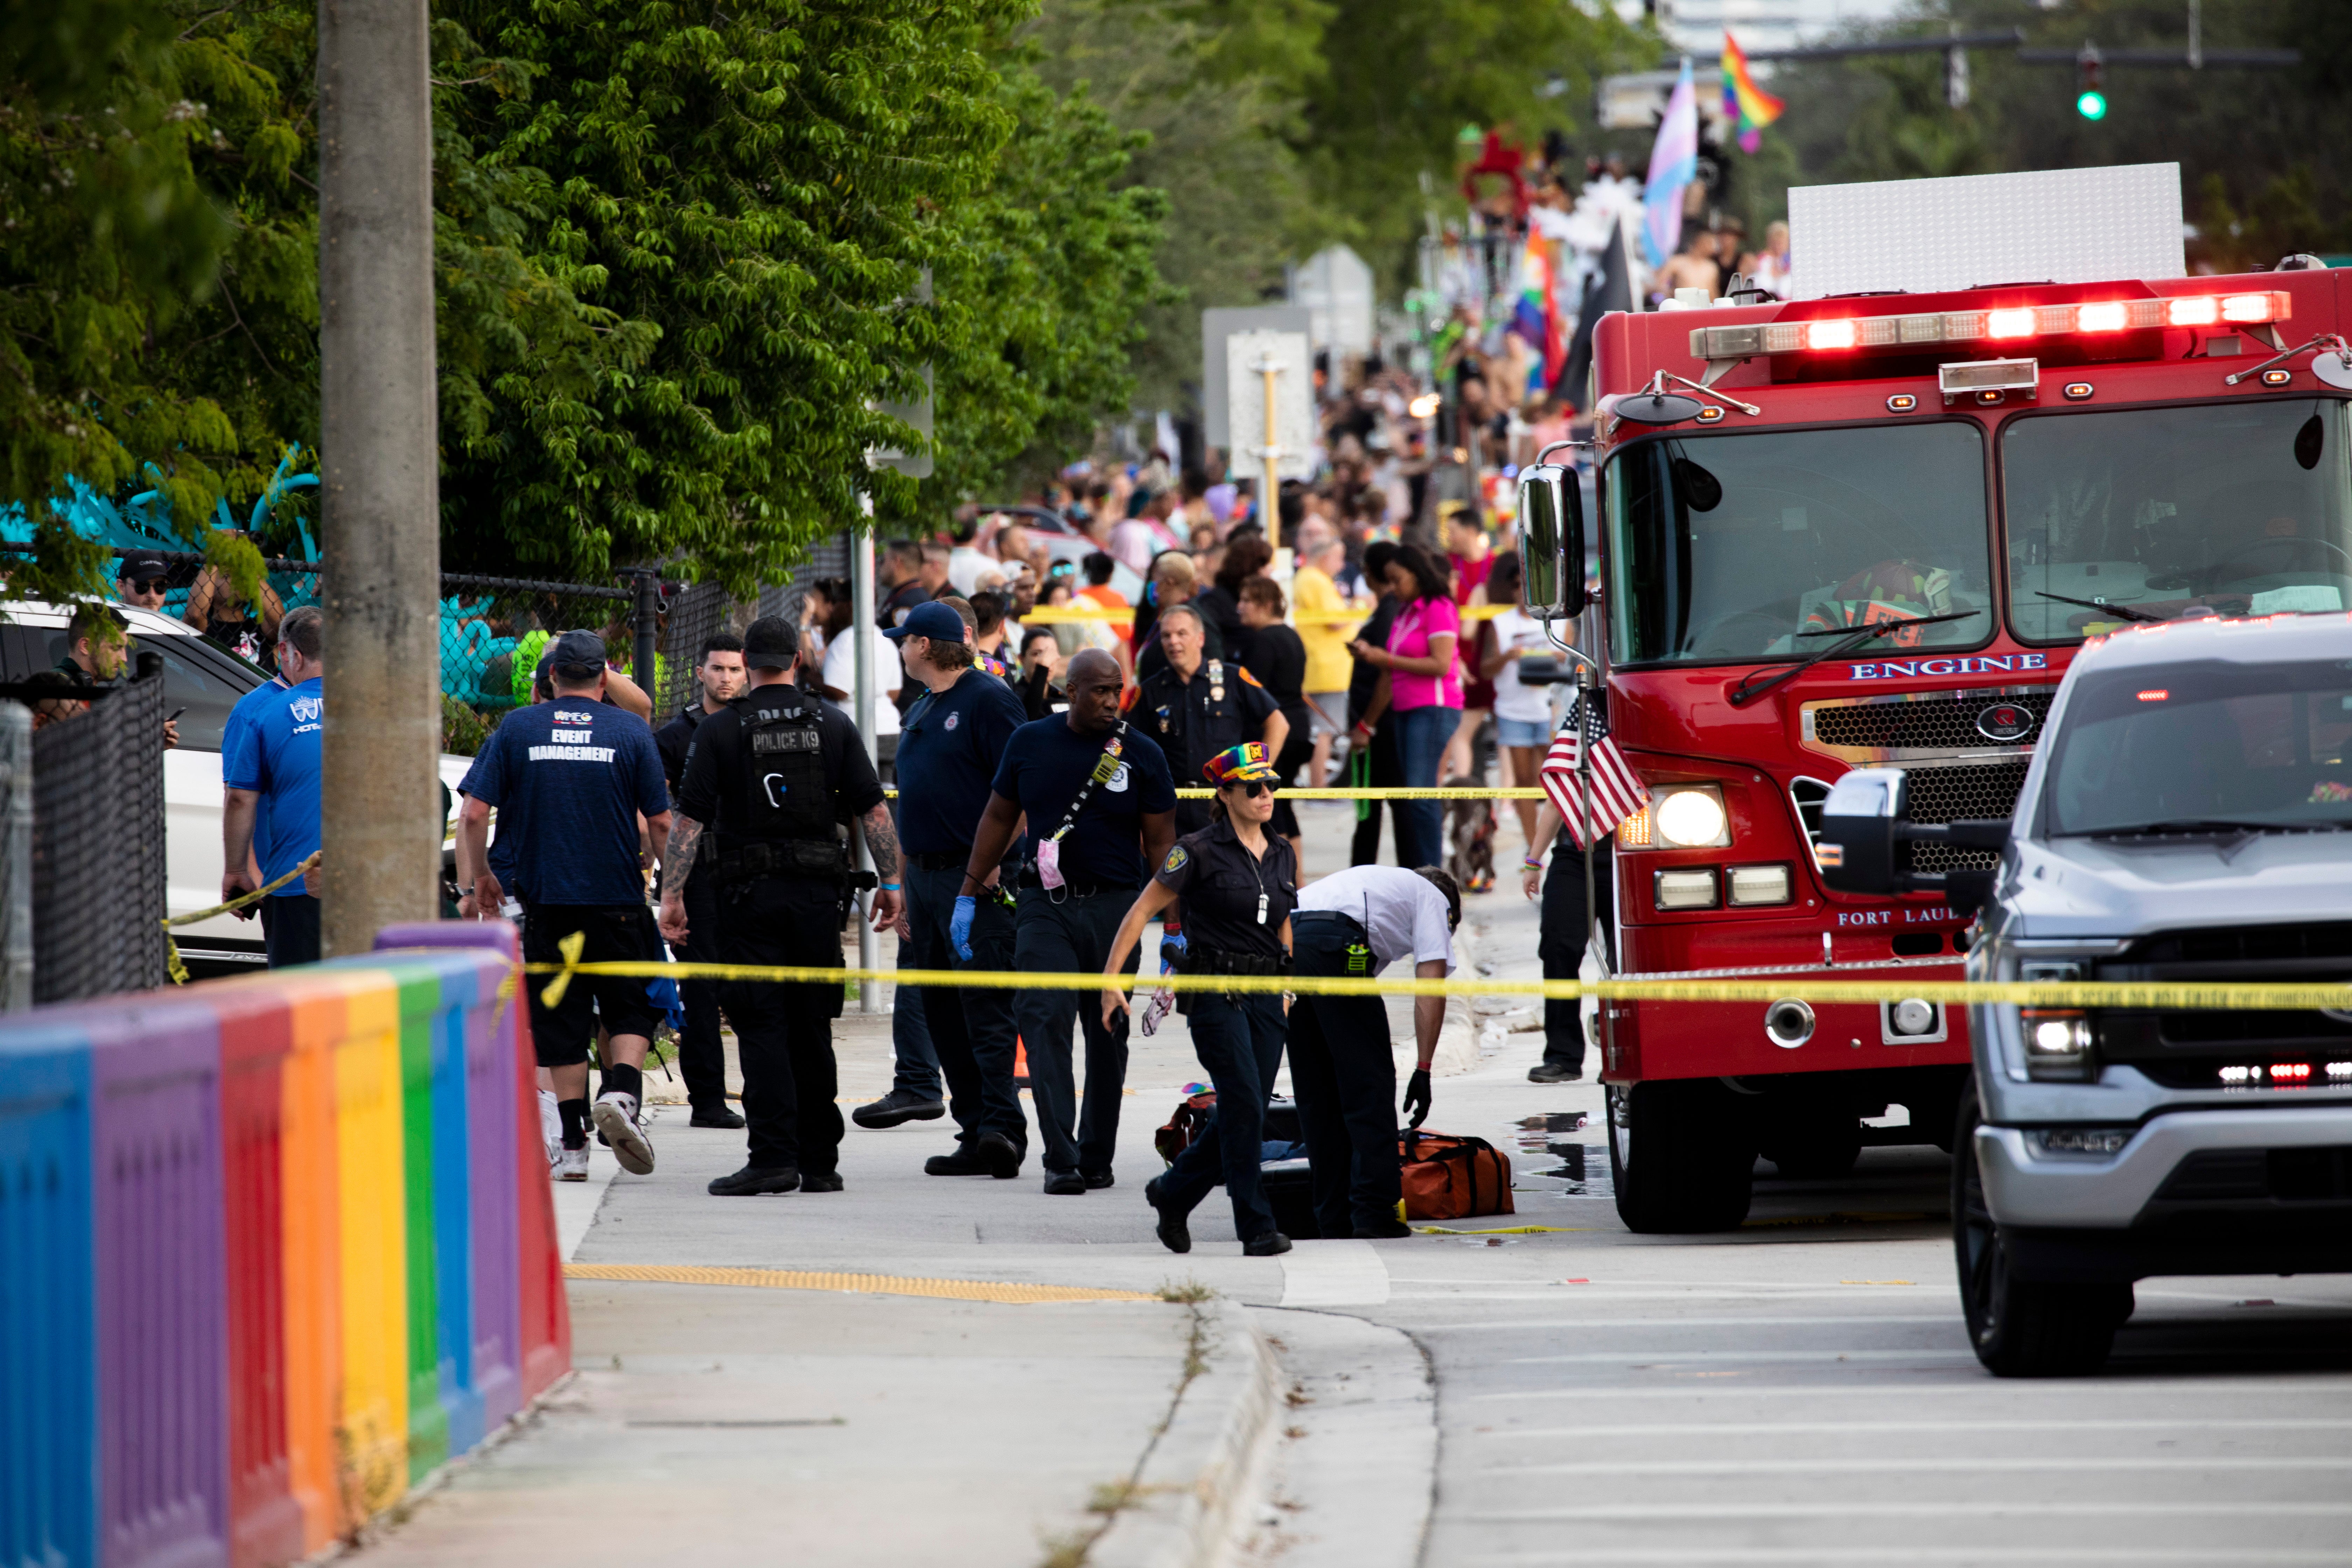 Police and firefighters respond after a truck drove into a crowd of people during The Stonewall Pride Parade and Street Festival in Wilton Manors, Fla., on Saturday, June 19, 2021